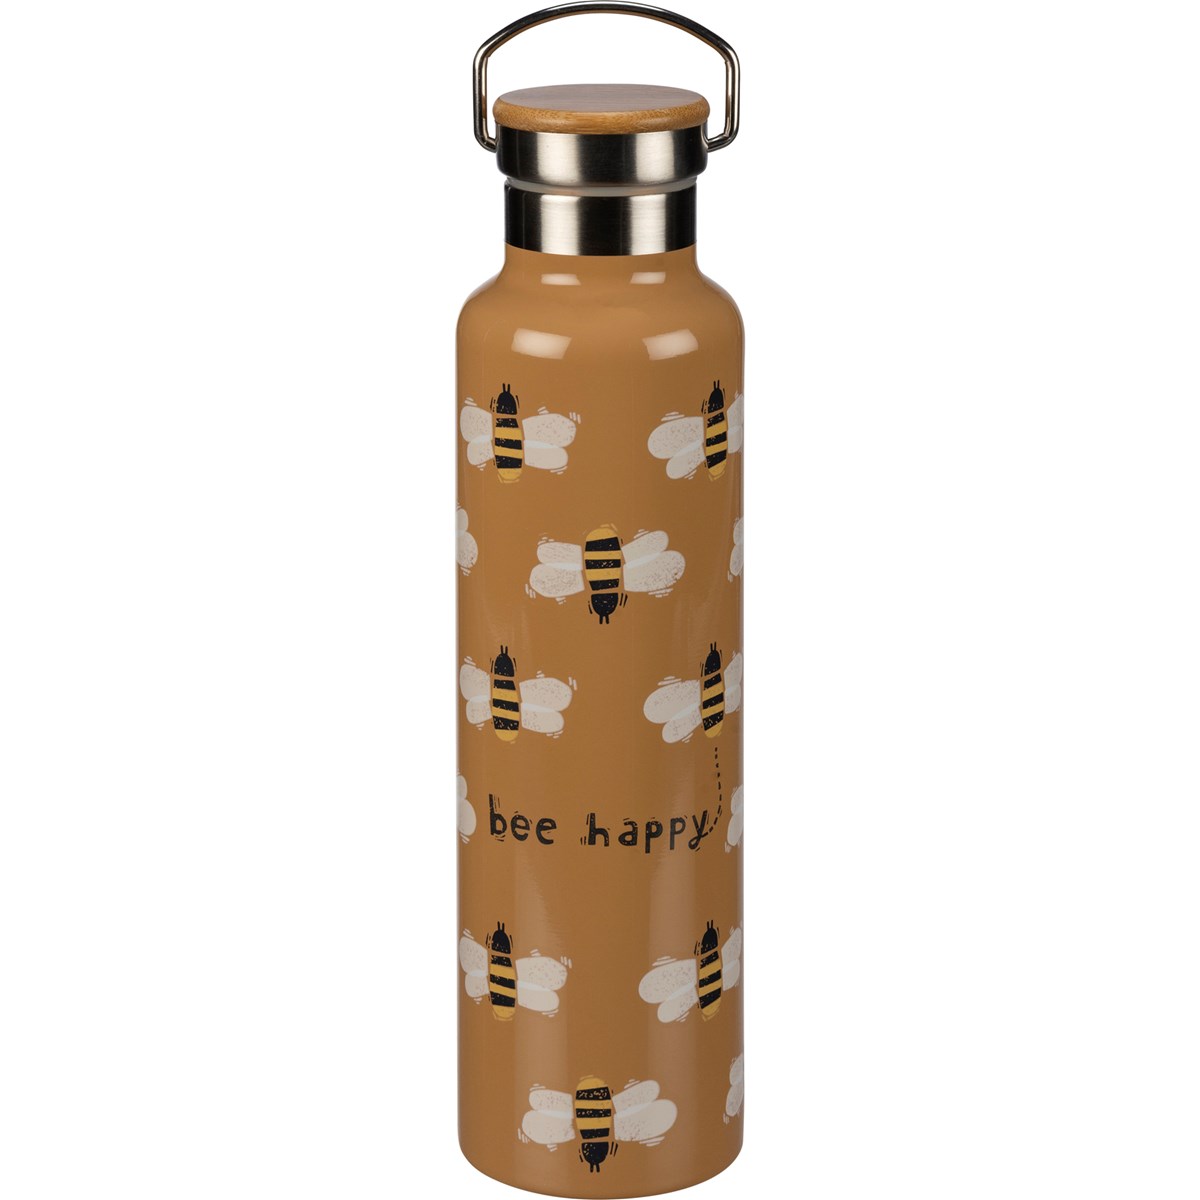 Bee Happy Insulated Bottle - Stainless Steel, Bamboo